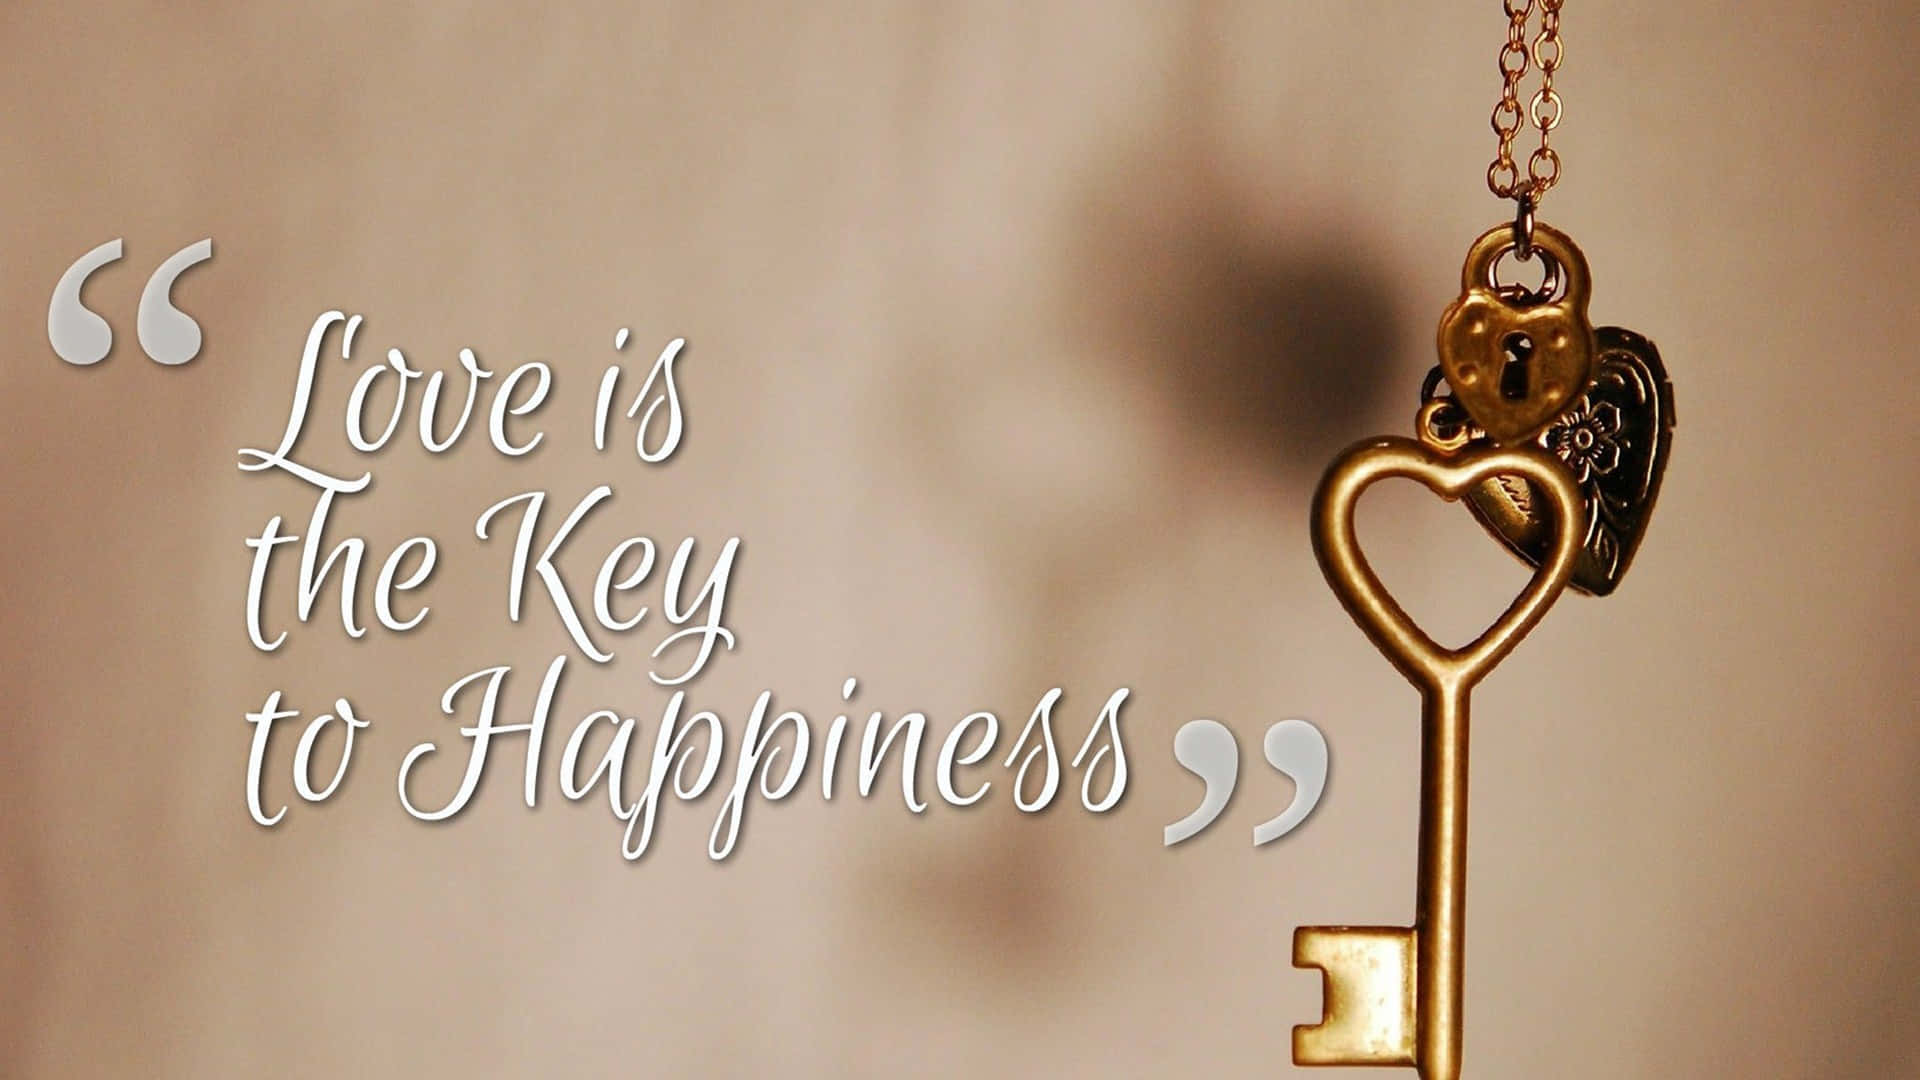 Love Key Happiness Quote Wallpaper